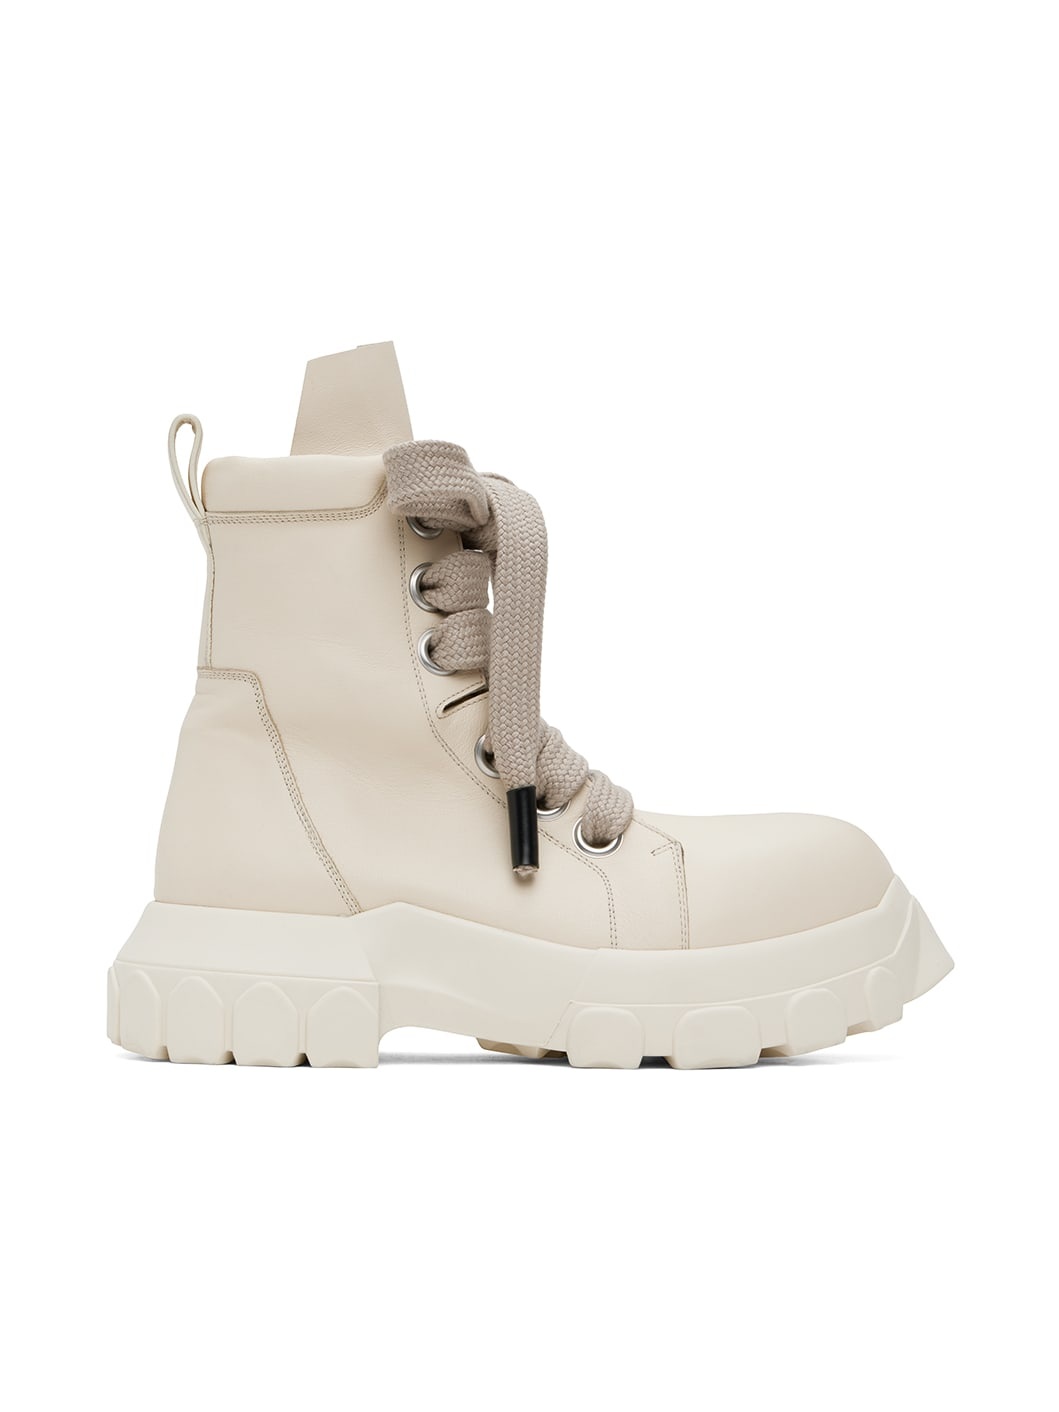 Off-White Jumbo Laced Bozo Tractor Boots - 1